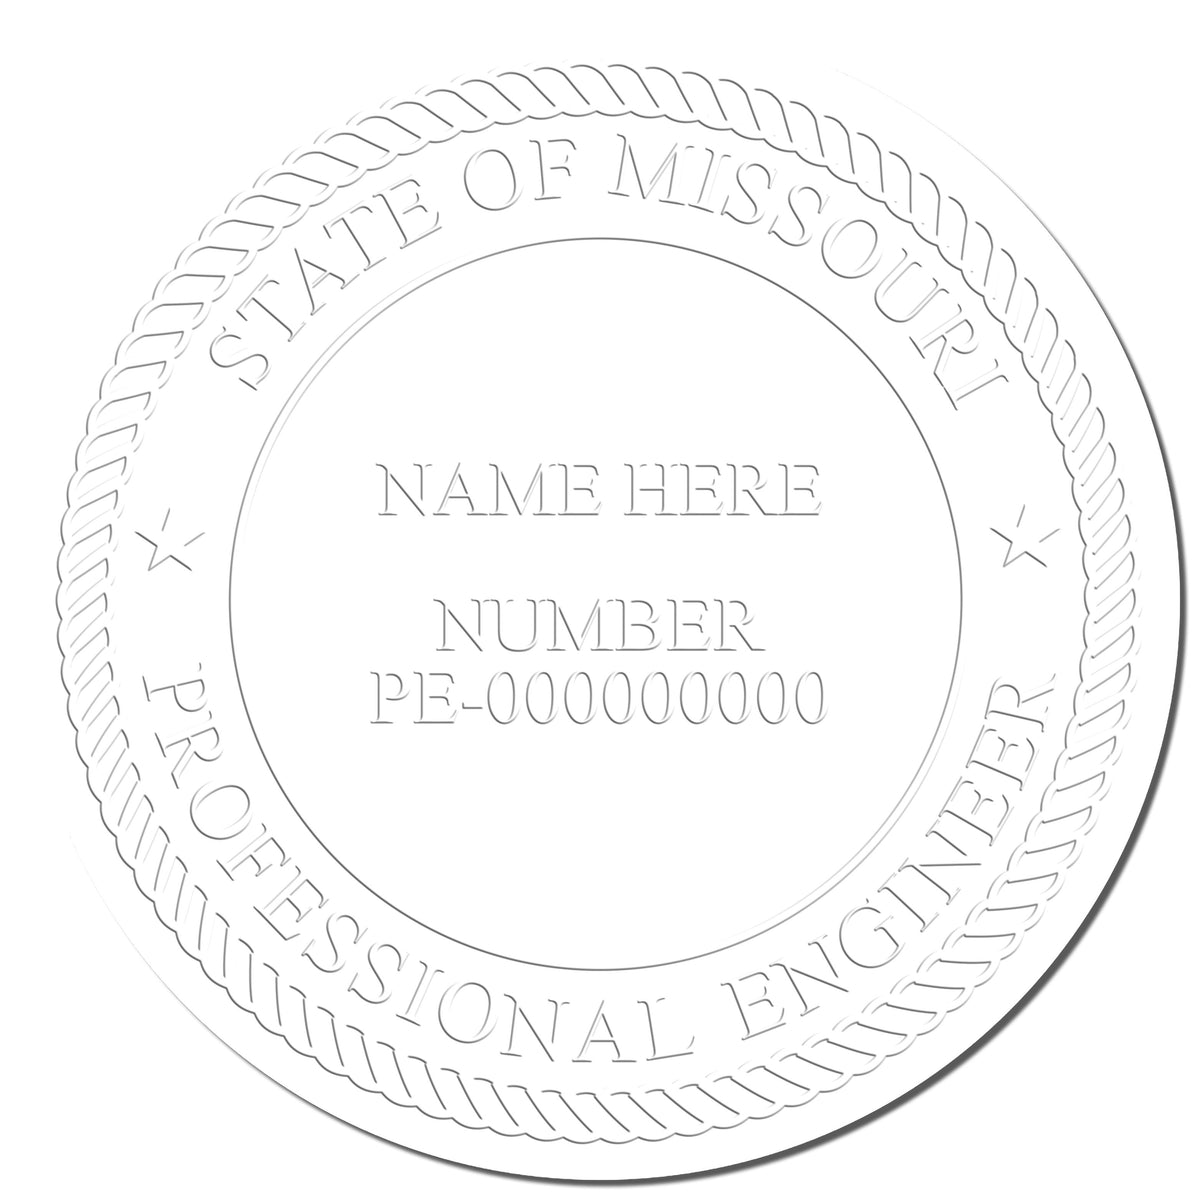 This paper is stamped with a sample imprint of the Hybrid Missouri Engineer Seal, signifying its quality and reliability.